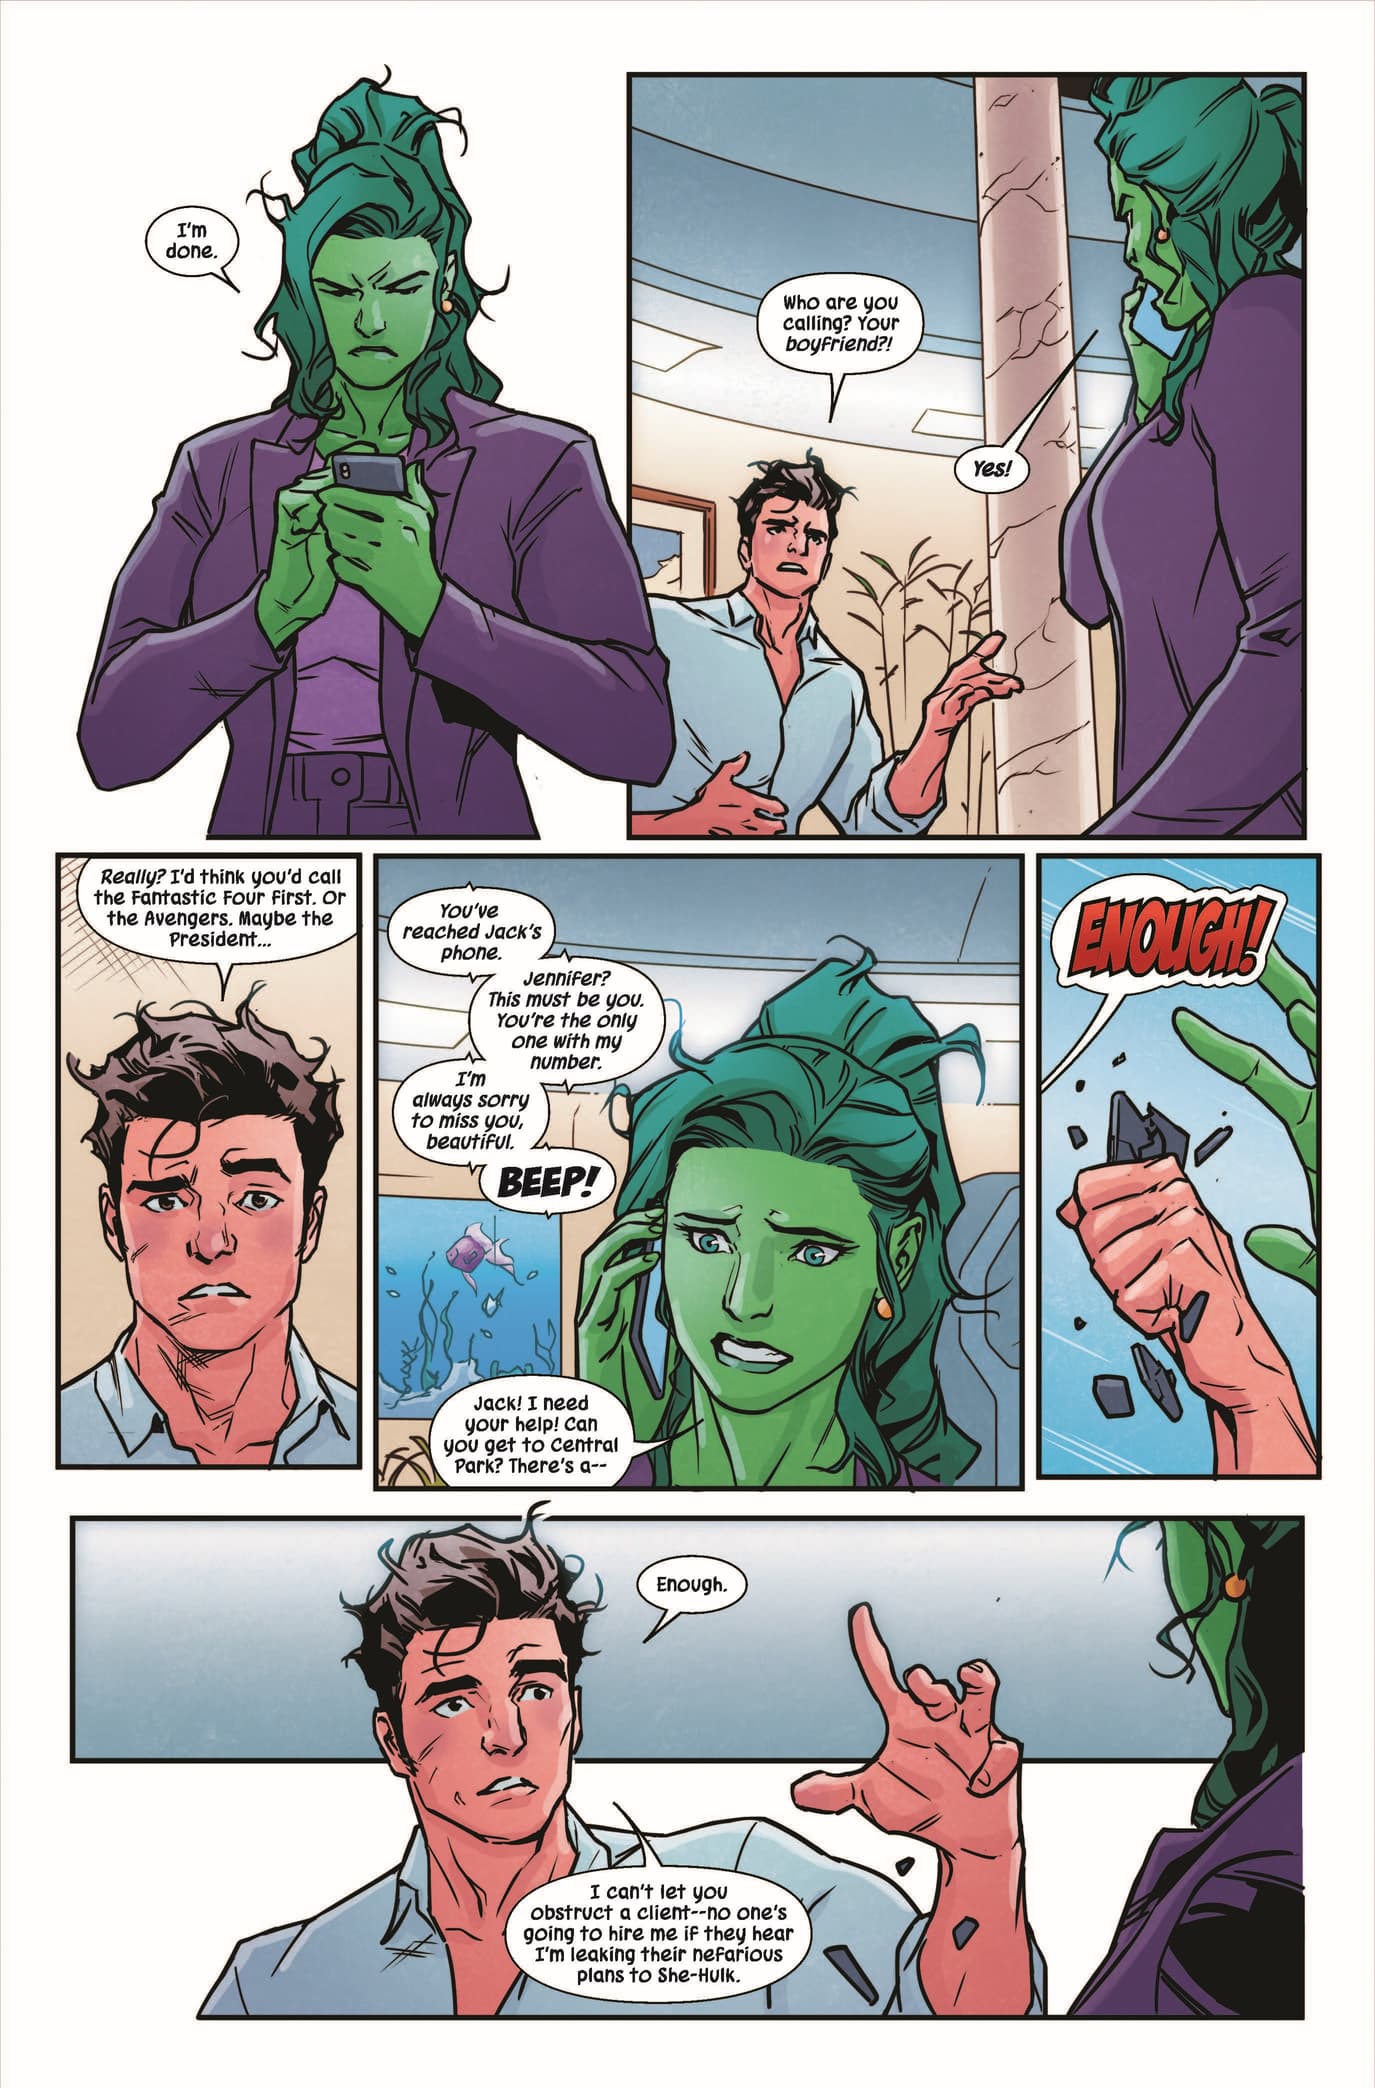 SHE-HULK (2023) #15 page by Rainbow Rowell and Andrés Genolet